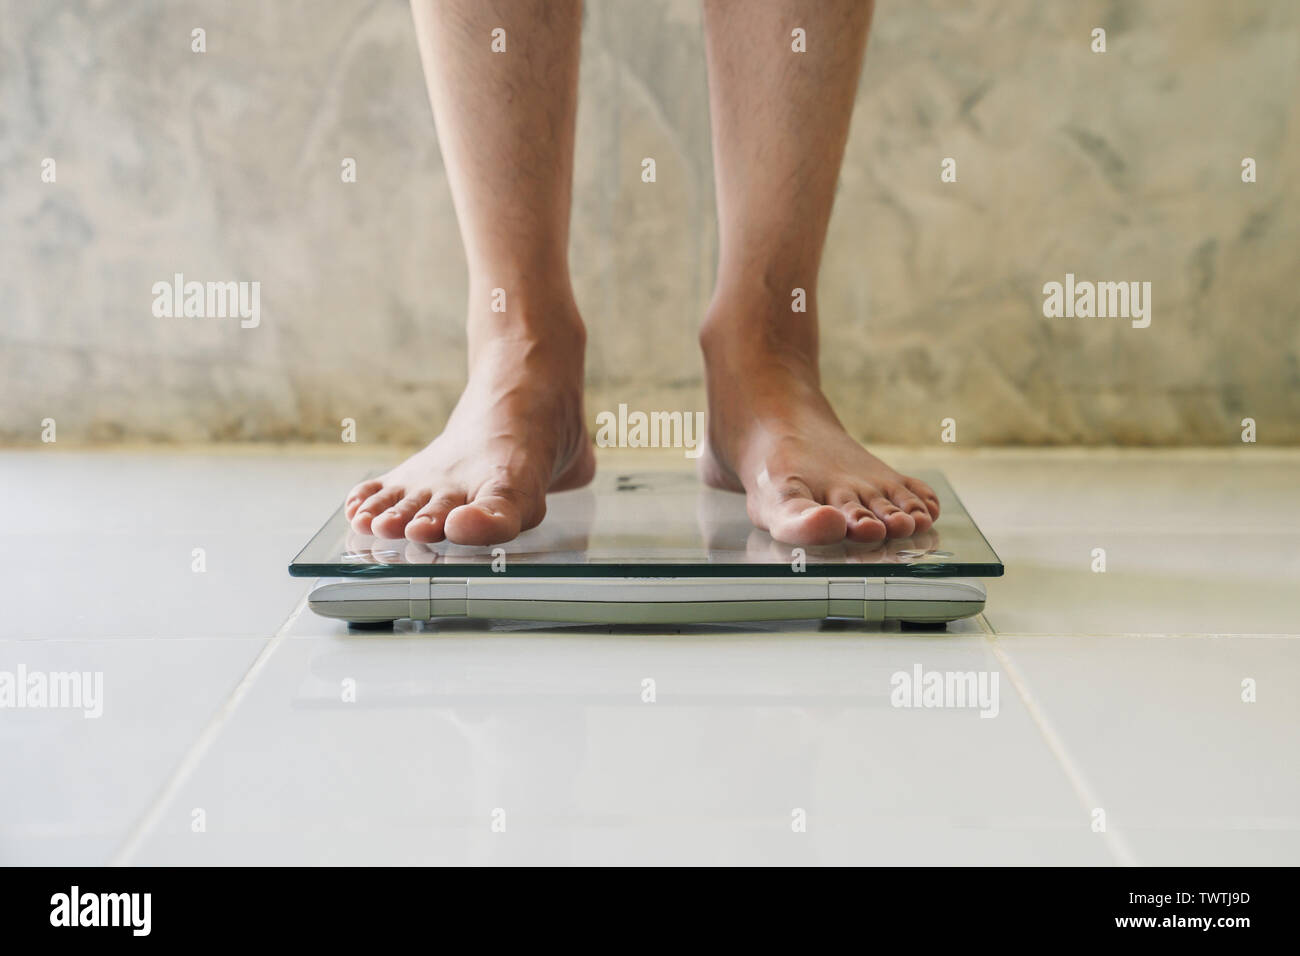 Male on weight scale on floor background, Diet concept. Stock Photo